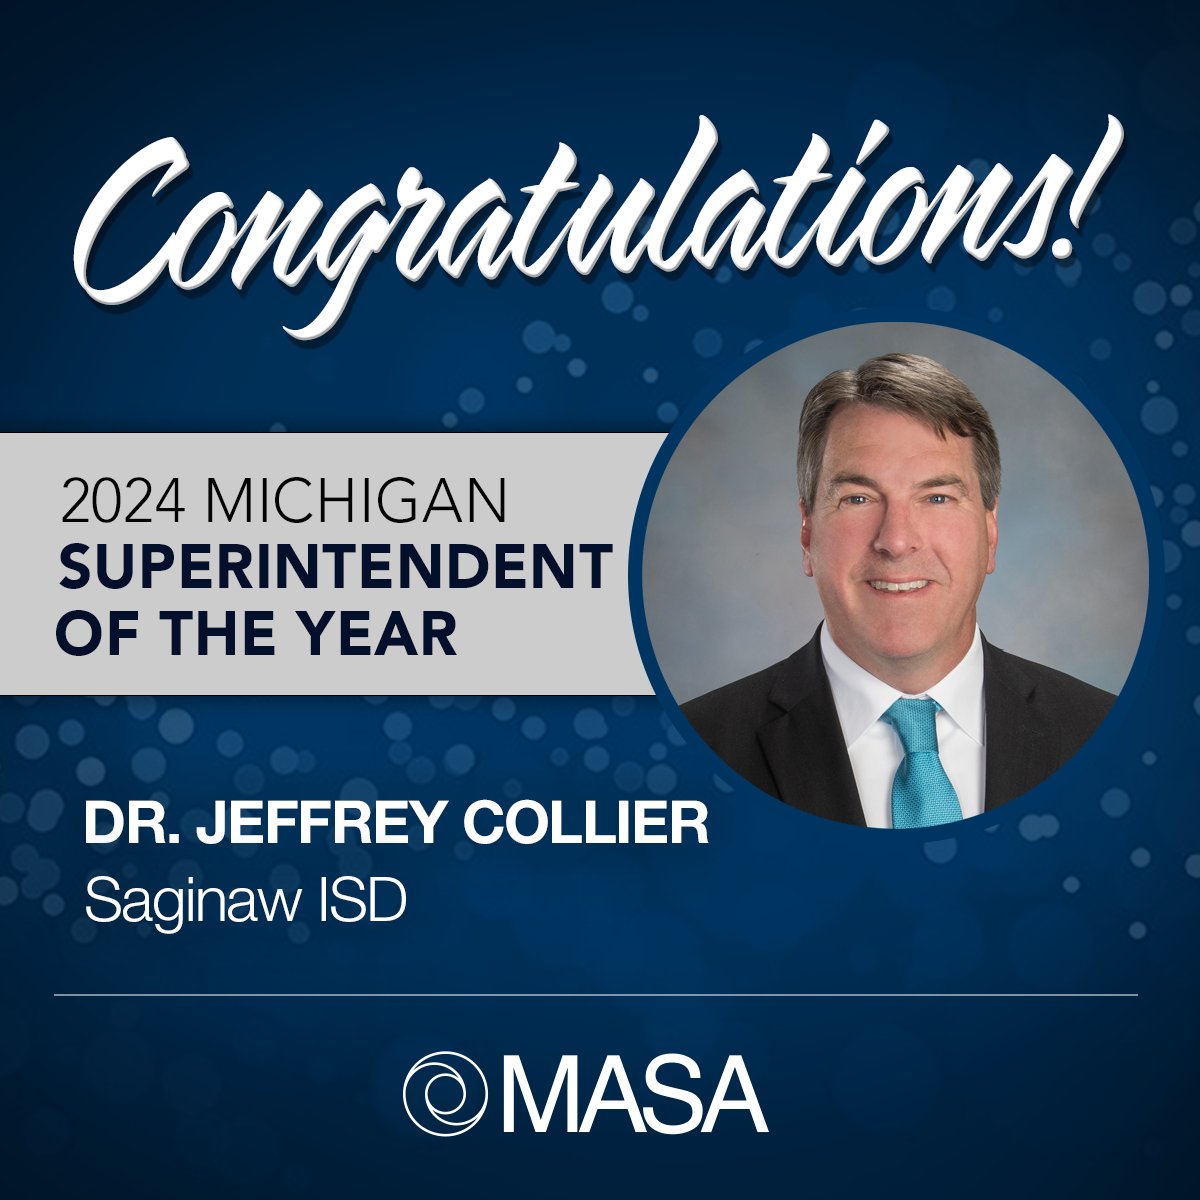 Congratulations to Dr. Jeffrey Collier, Superintendent of @SaginawISD and Michigan’s 2024 Superintendent of the Year! Read more: ow.ly/zROw50PXVBv #miched #MASAleads